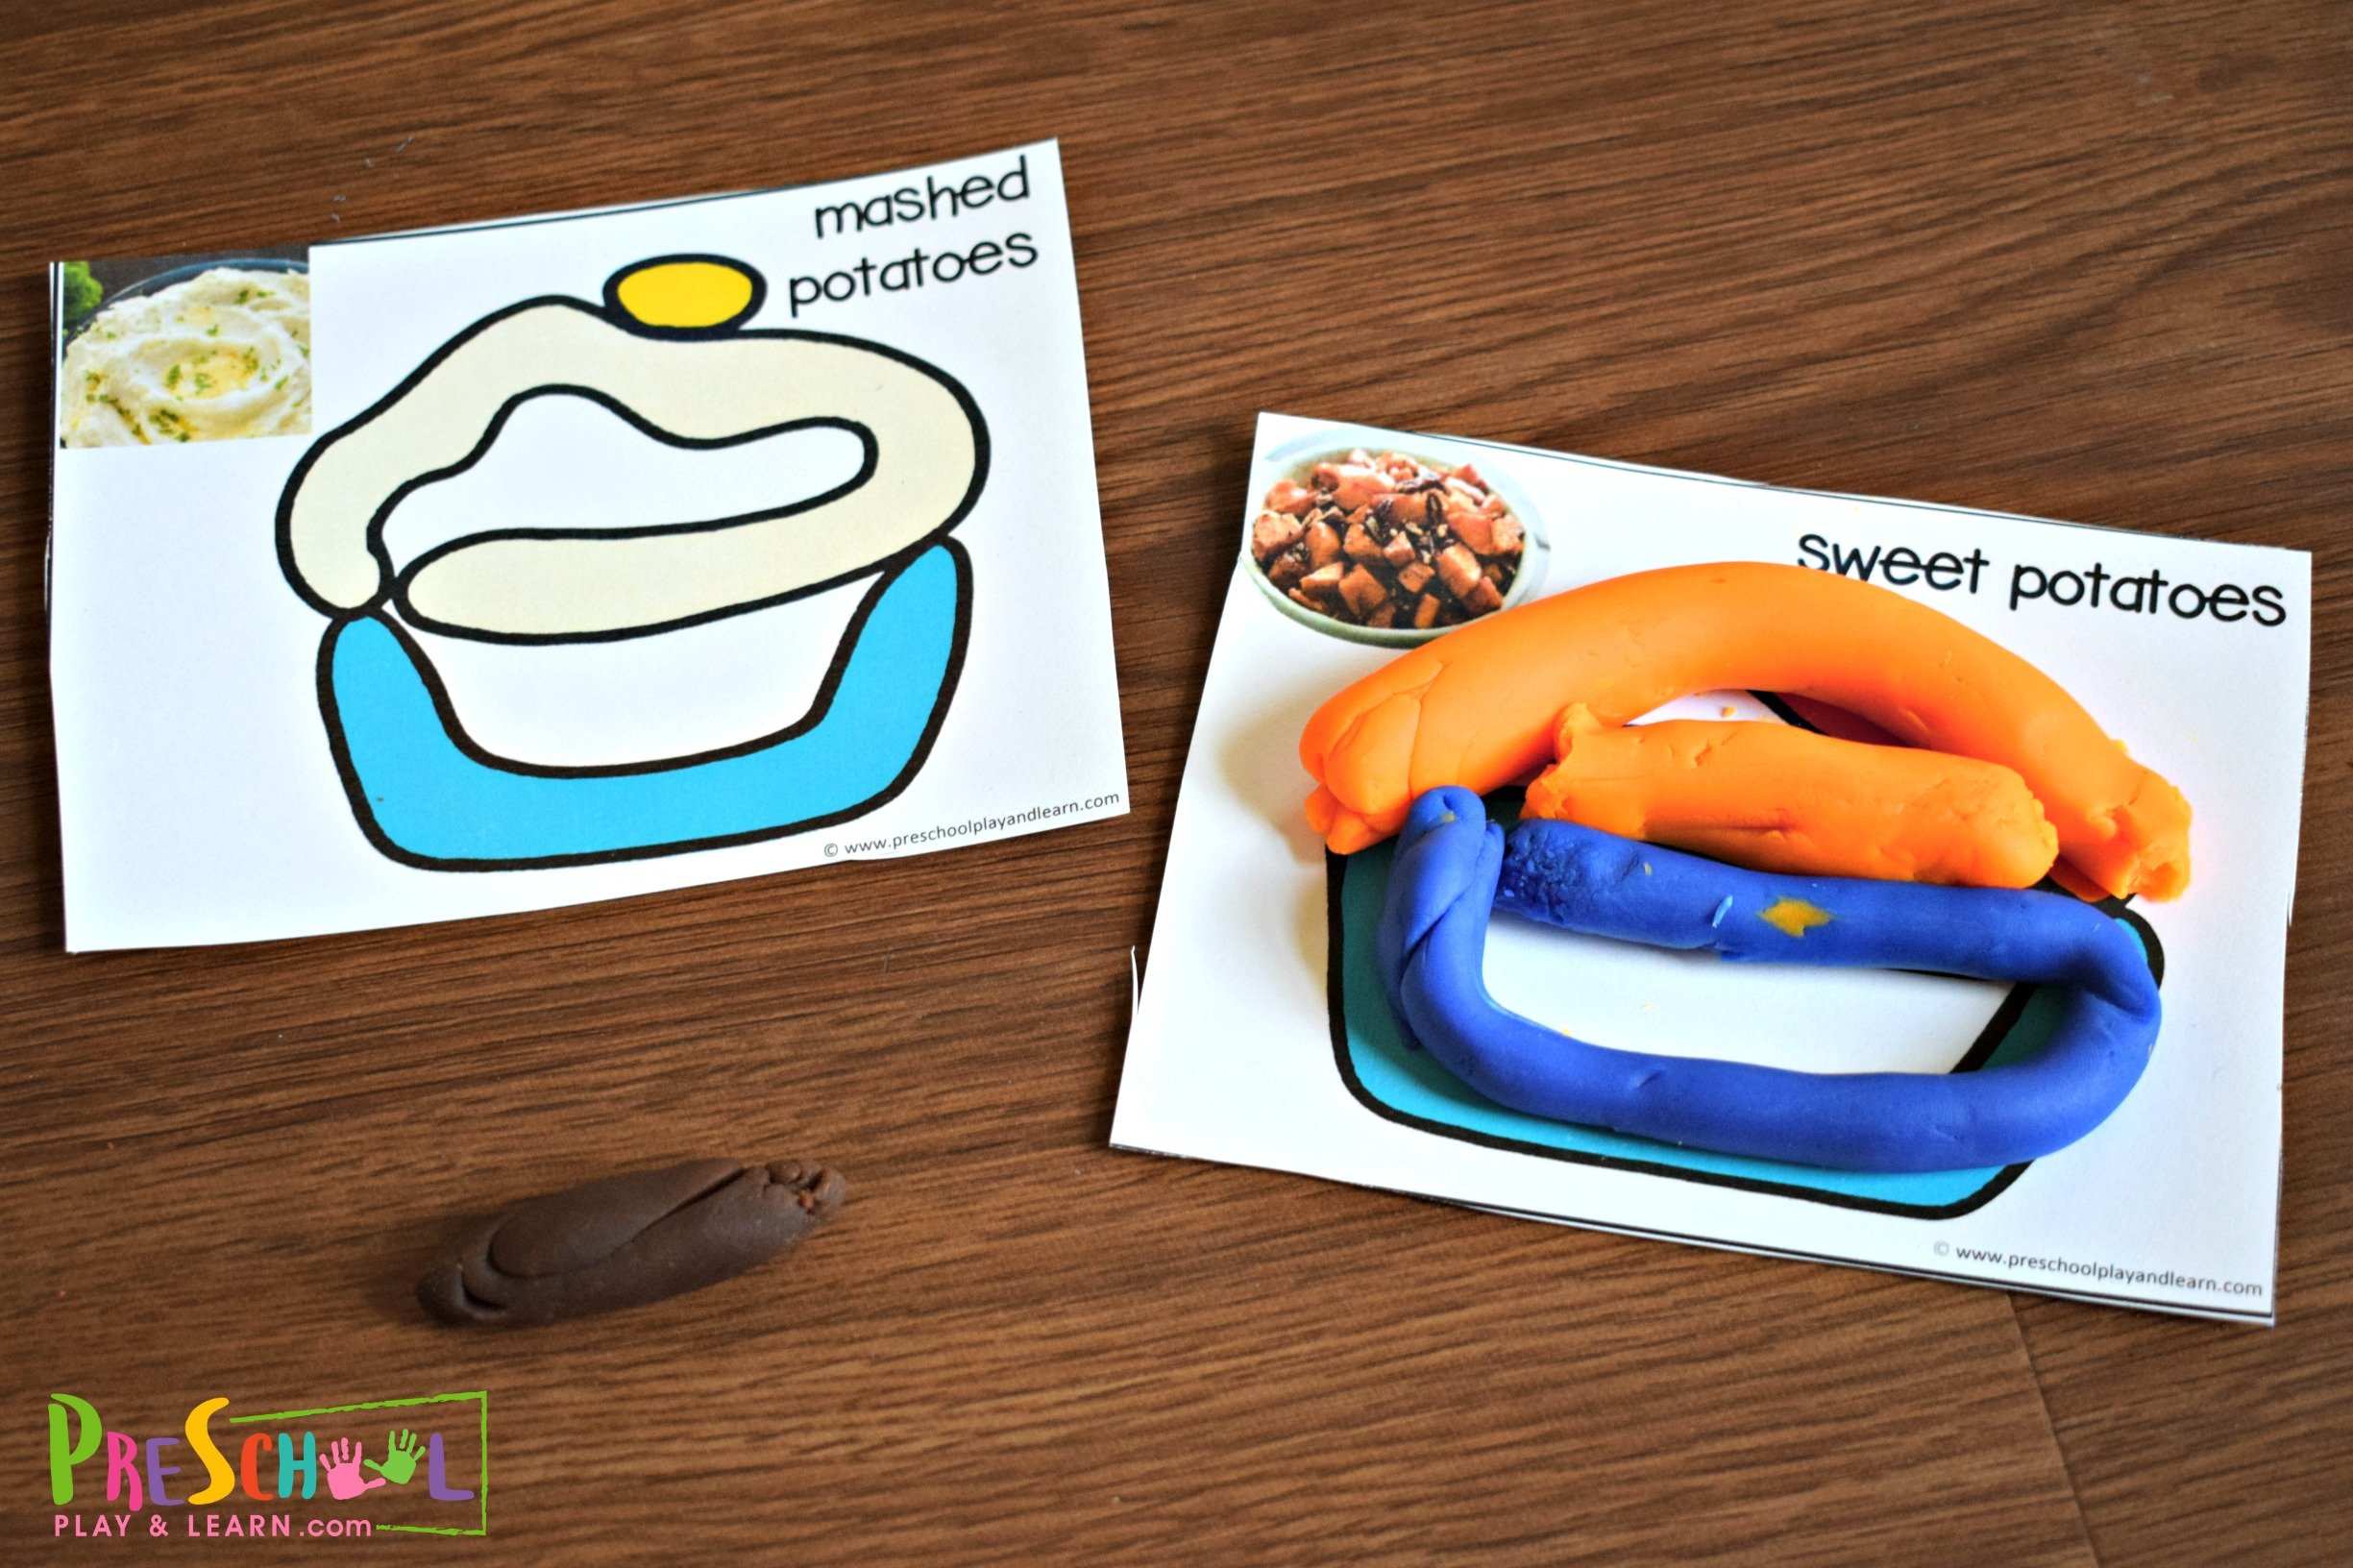 Thanksgiving Playdough Mats for Holidays with Kids (10 Free)